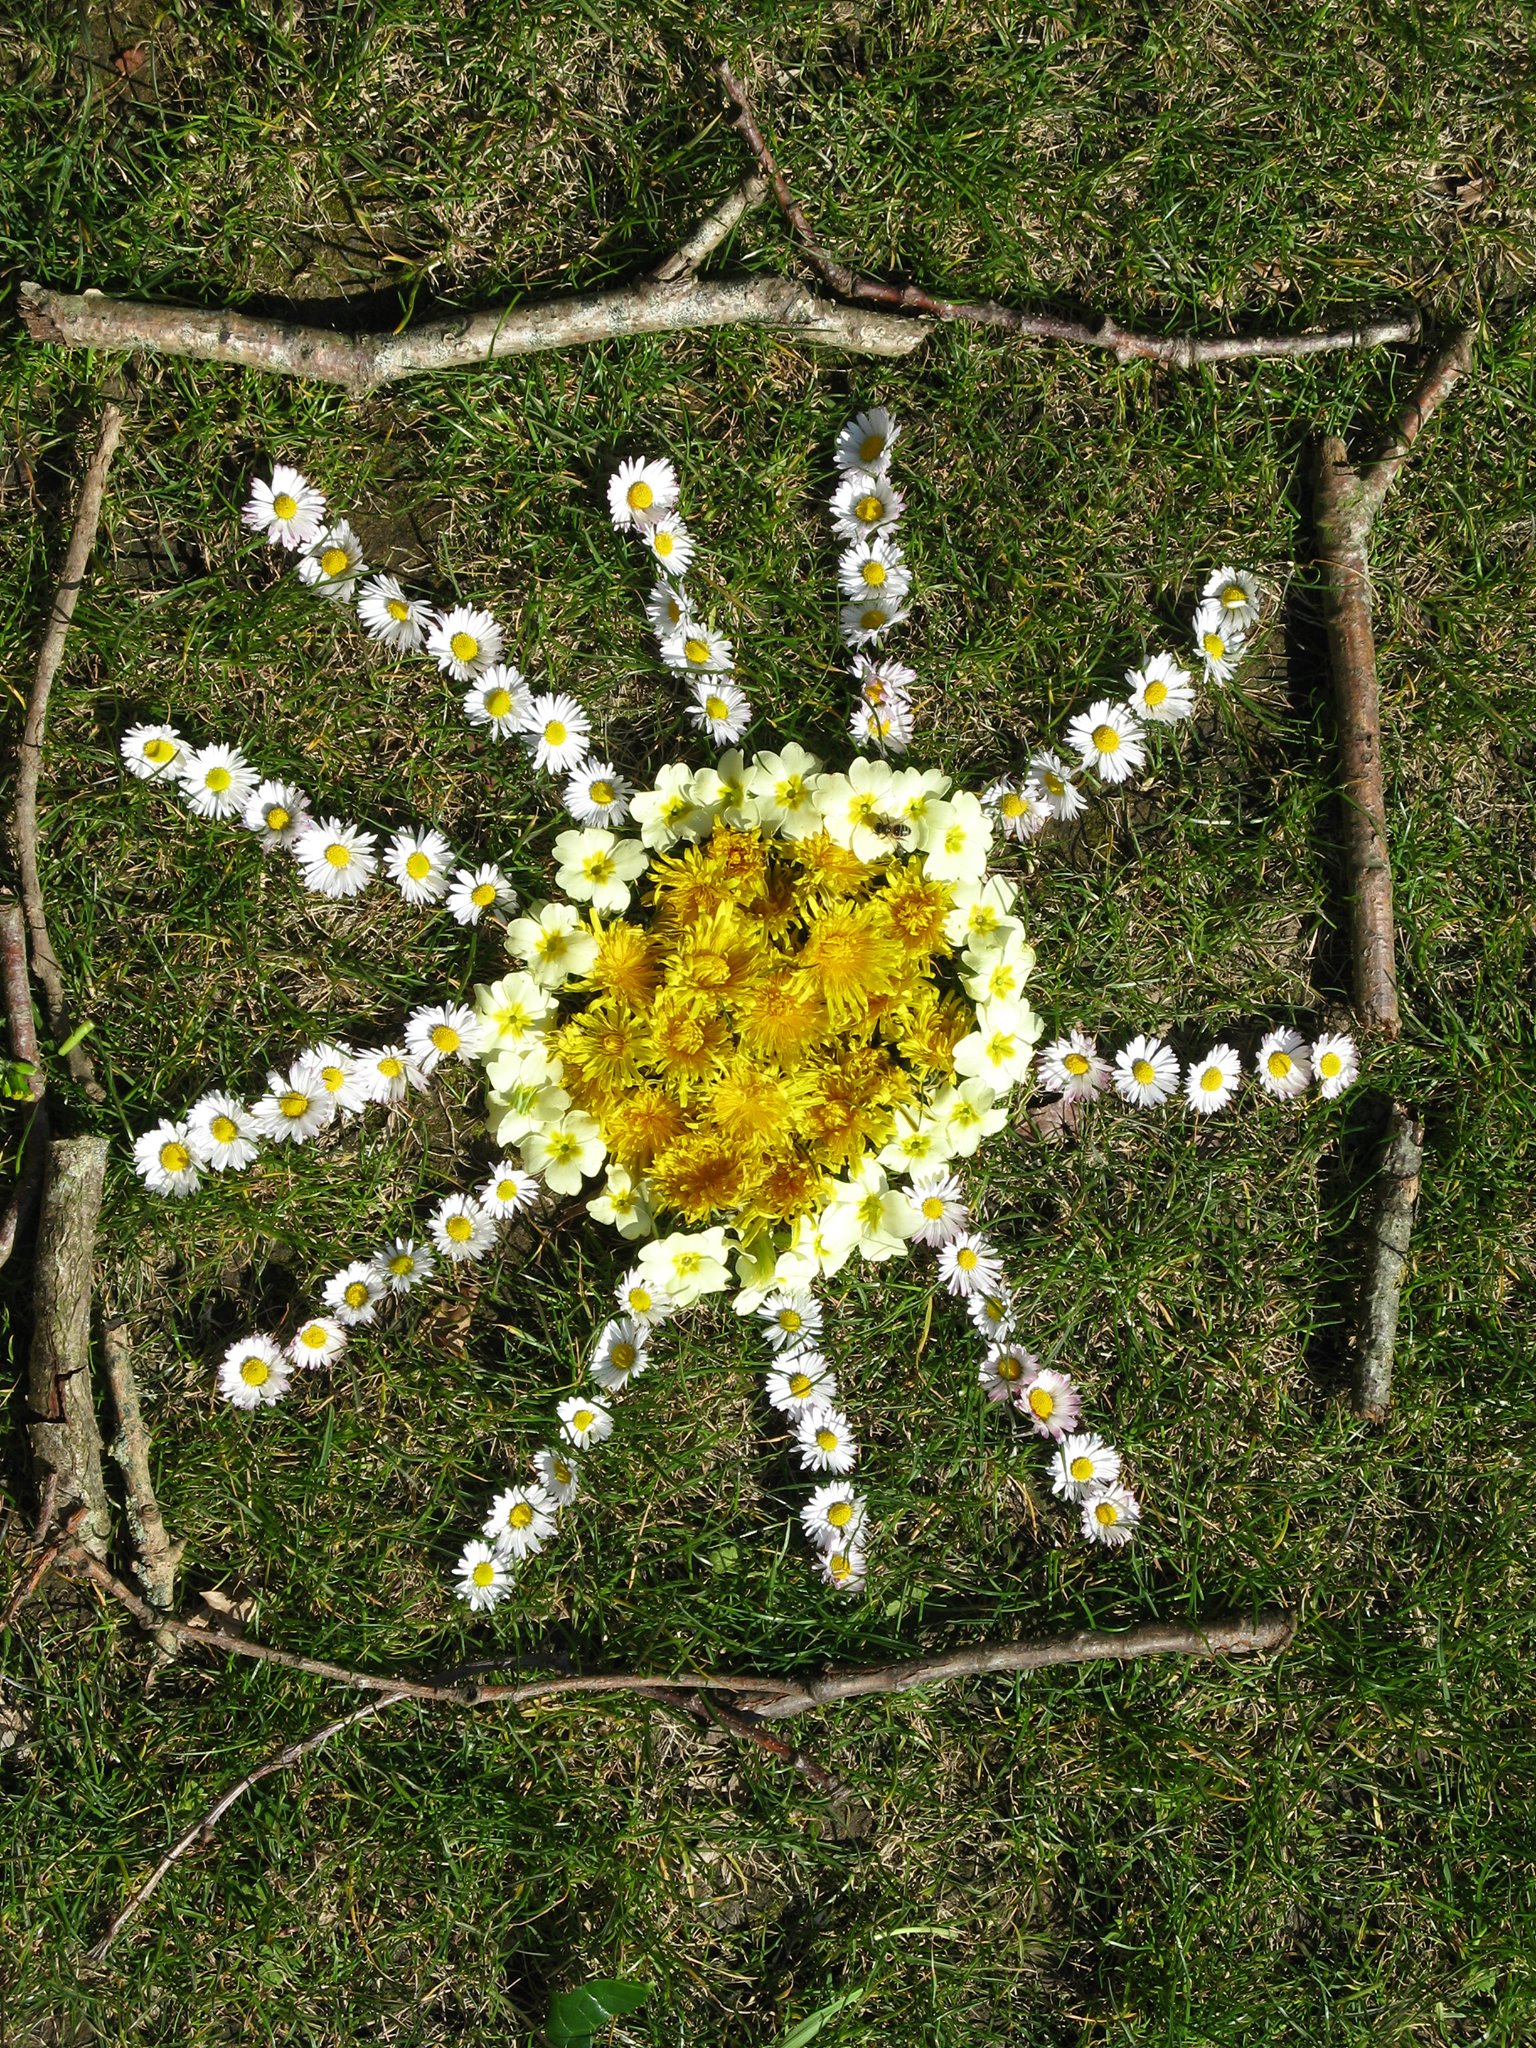 Flowers arranged artfully to make one large flower on the ground.